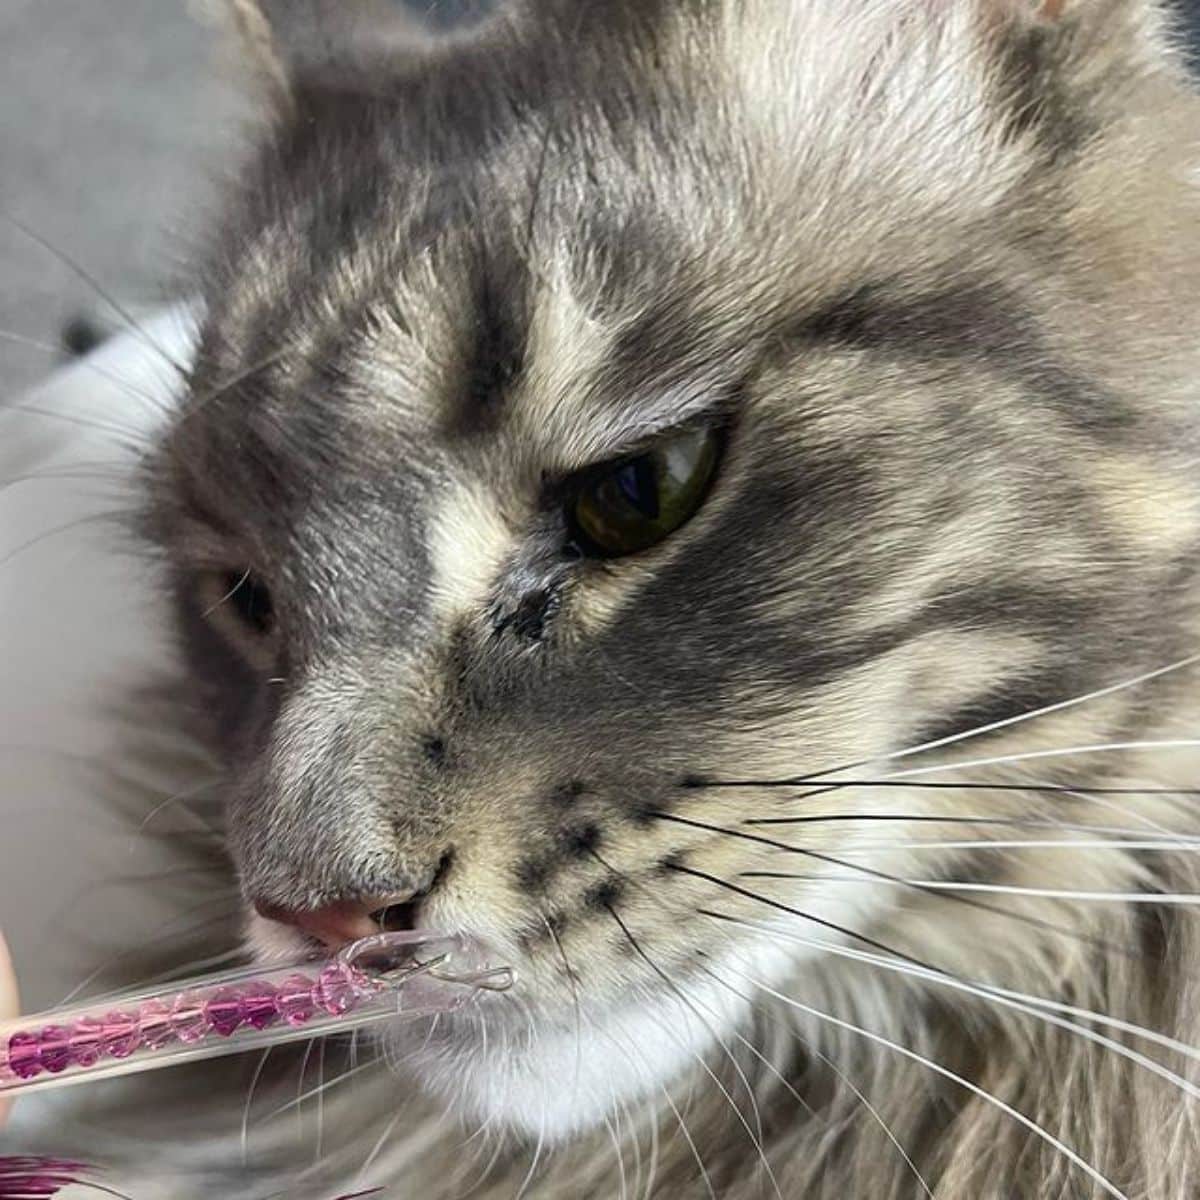 A close-up of a tabby maine coon sniffing an item.